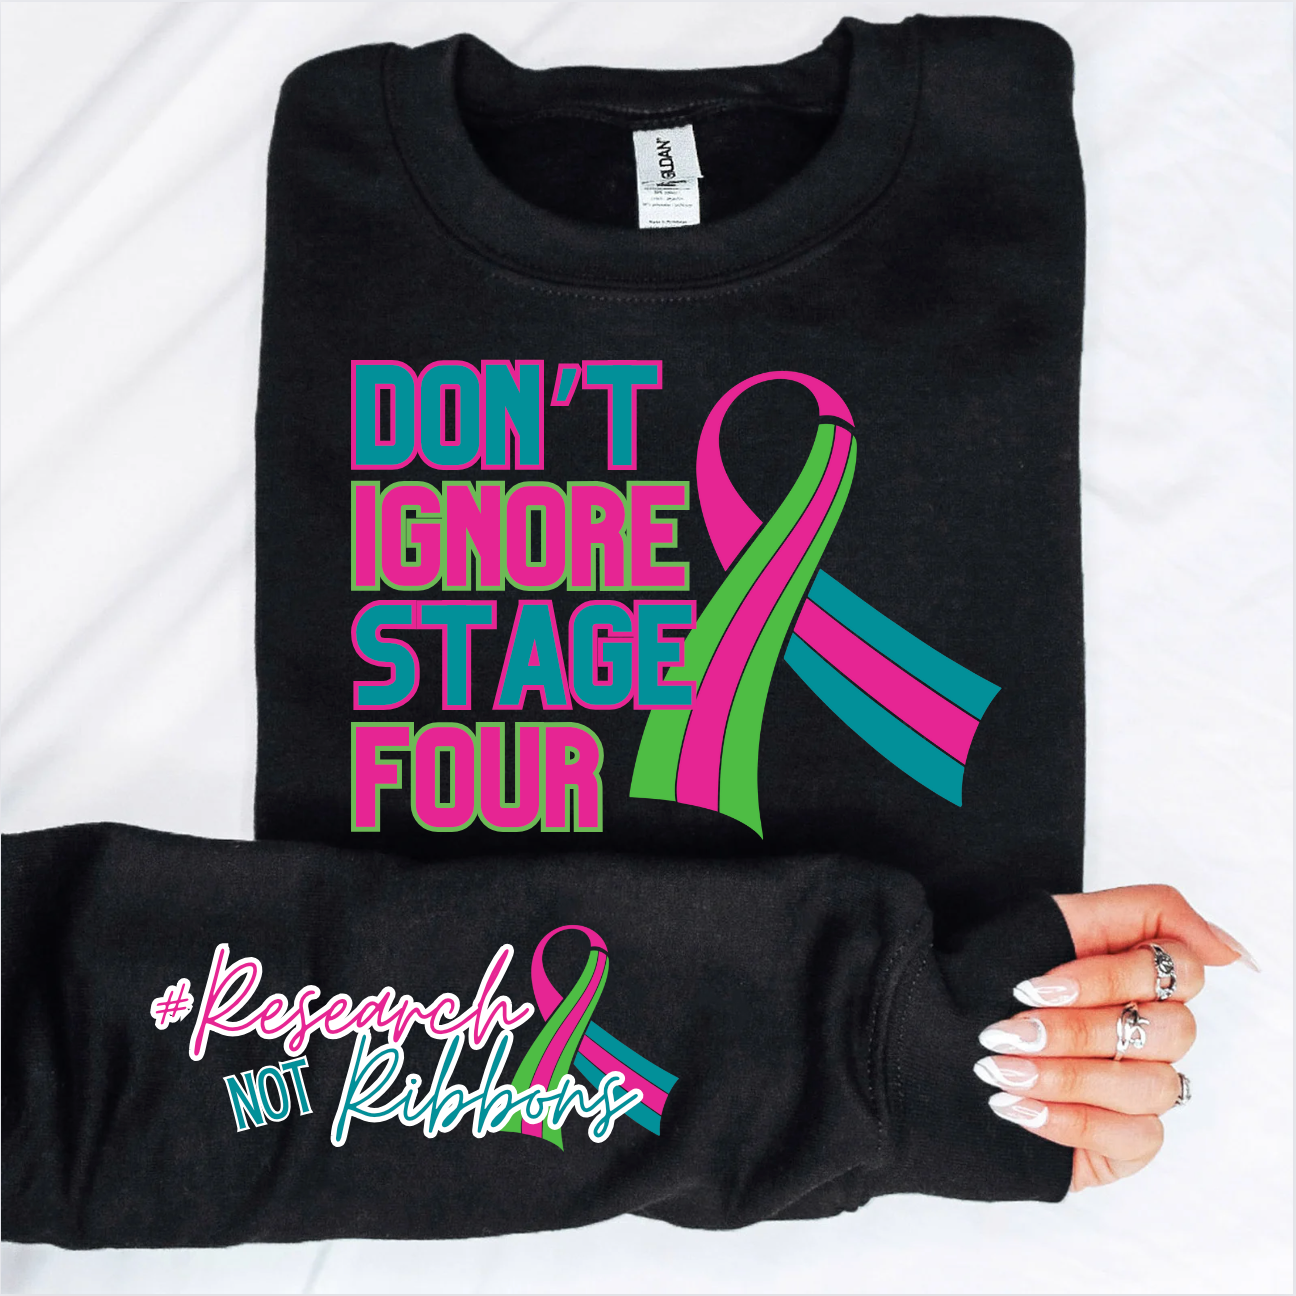 Don't Ignore Stage 4 (Full Front & Sleeve)- Elizabeth Fundraiser